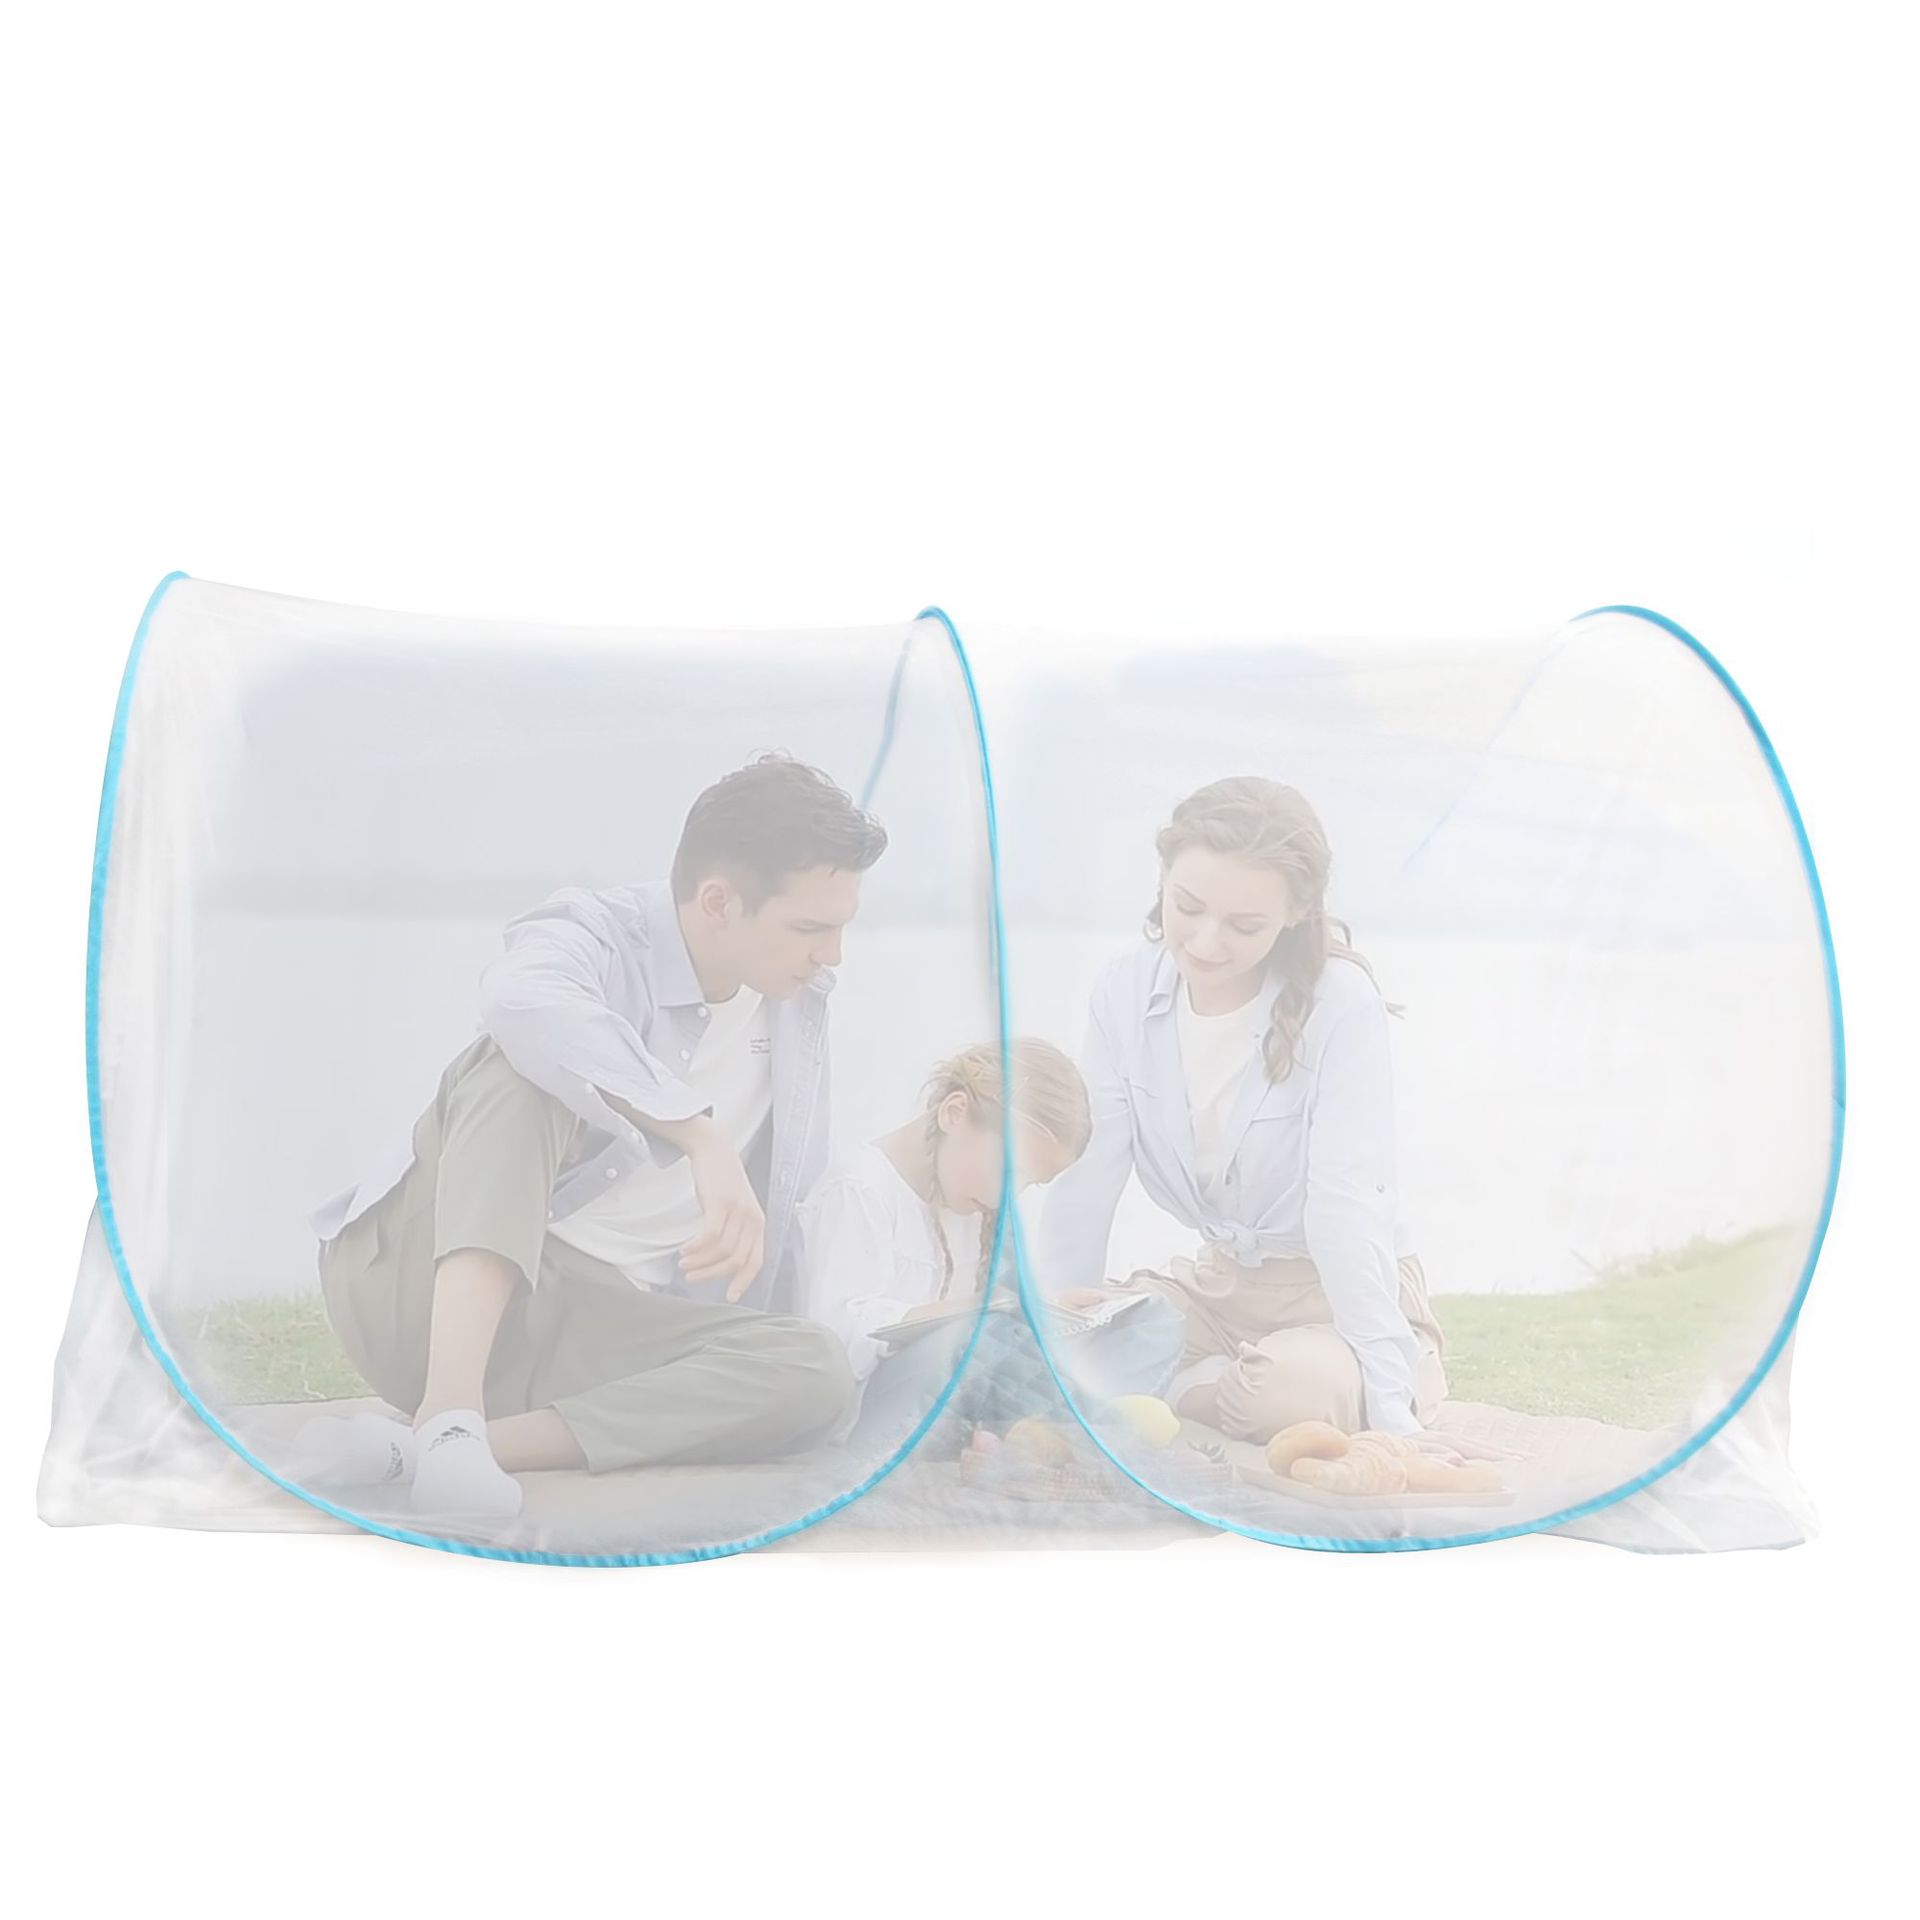 Space Capsule Double Travel Business Trip Bottomless Zipper-Free Encrypted Mesh Portable and Adjustable Size Installed Mosquito Nets